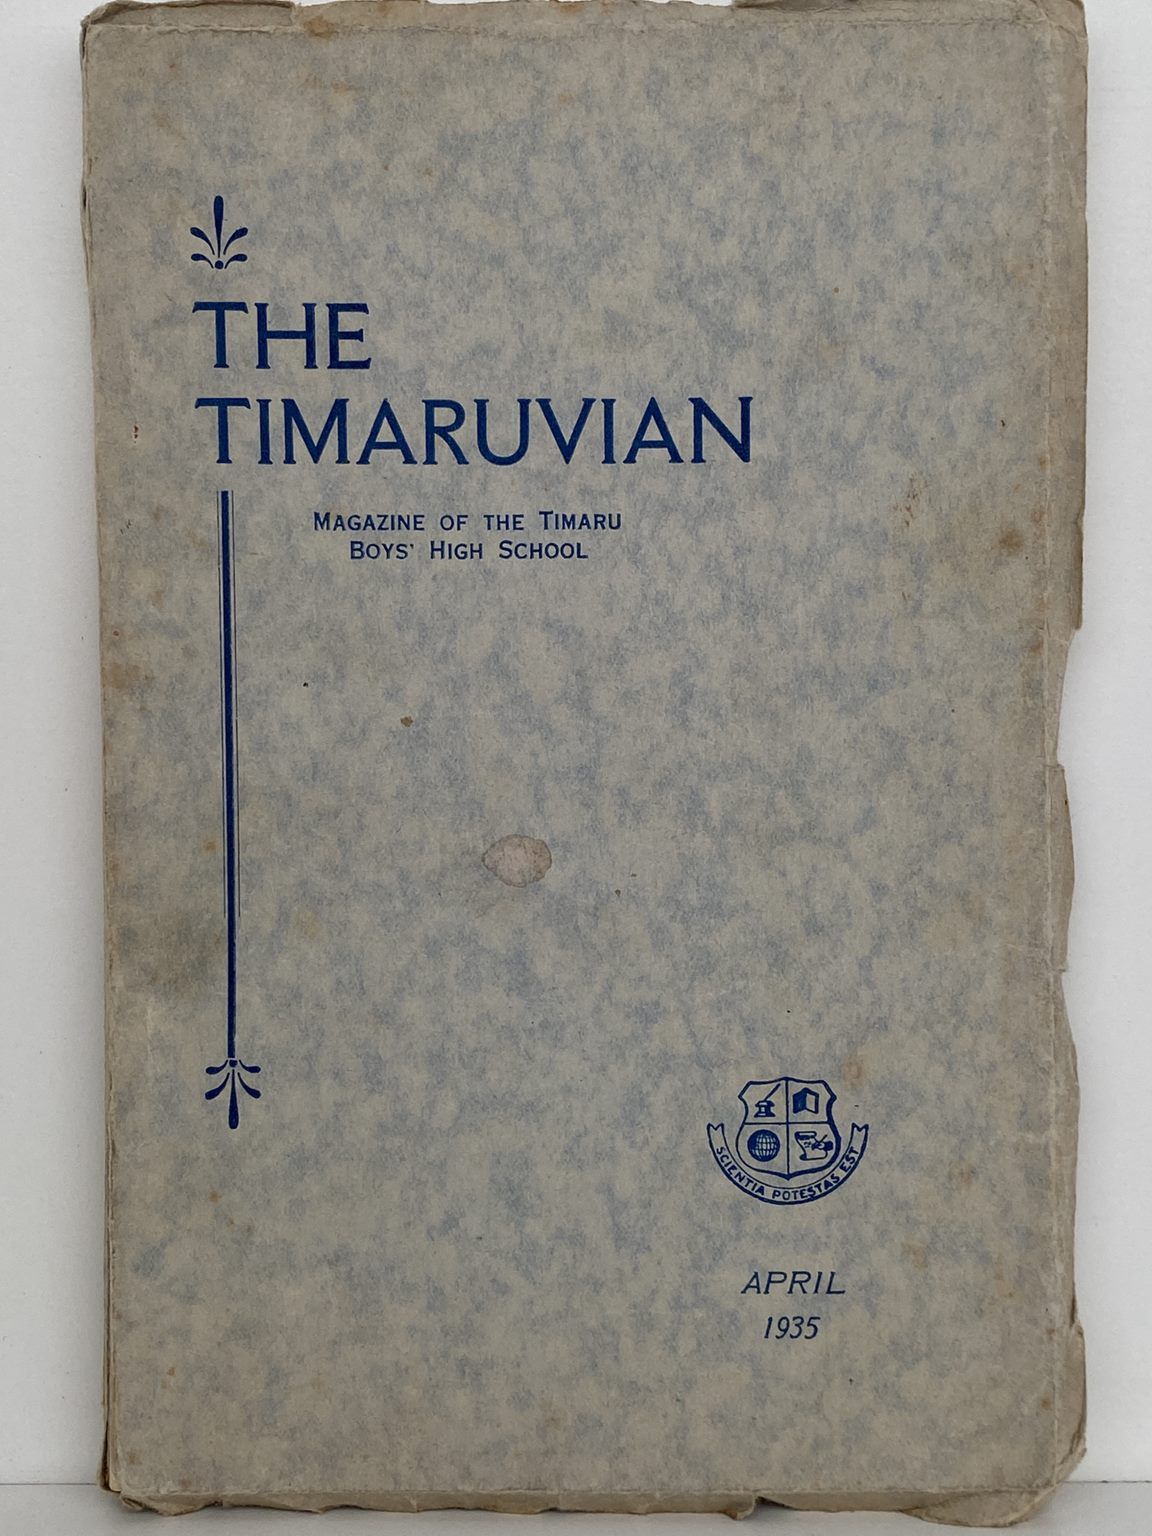 THE TIMARUVIAN: Magazine of the Timaru Boys' High School and its Old Boys' Association 1935